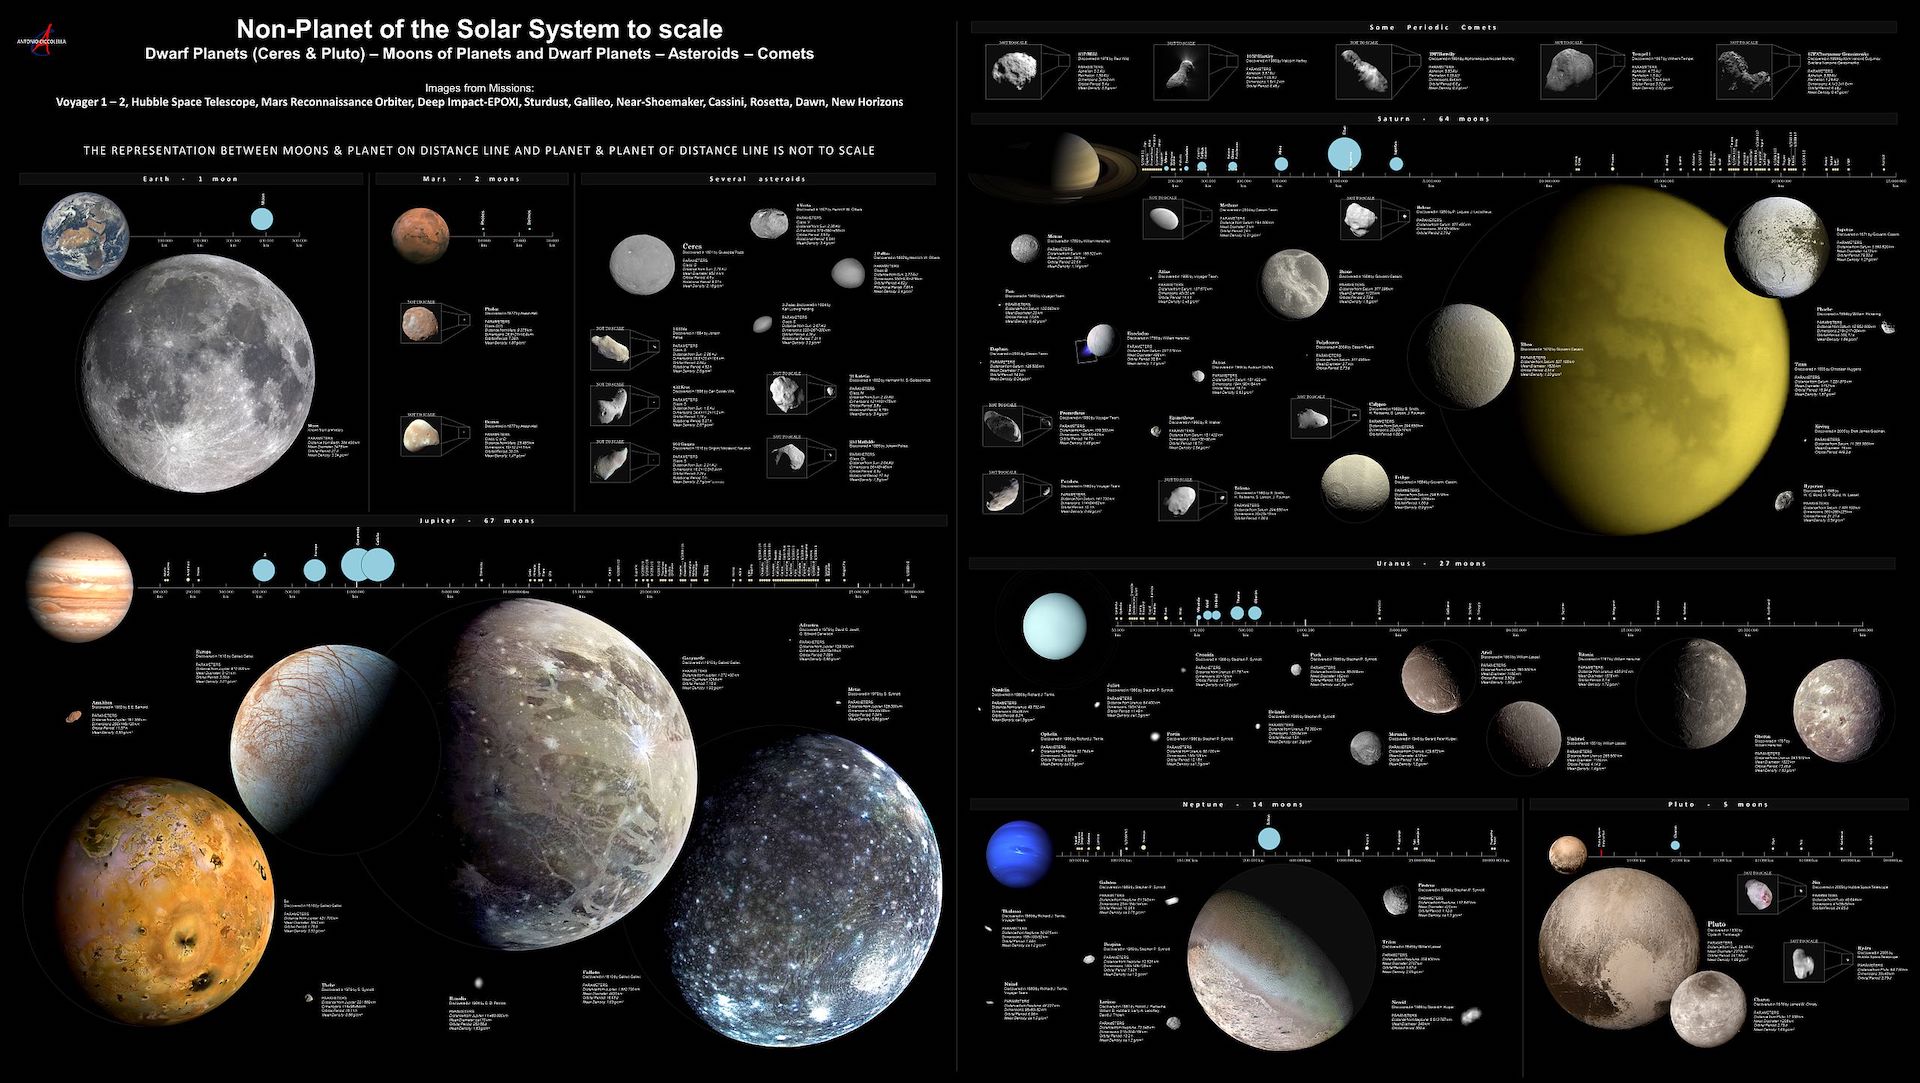 Amazing infographic showing real pictures of many of the Solar System’s moons and dwarf planets – all clues for astronomers who want to understand the story of our planetary system.